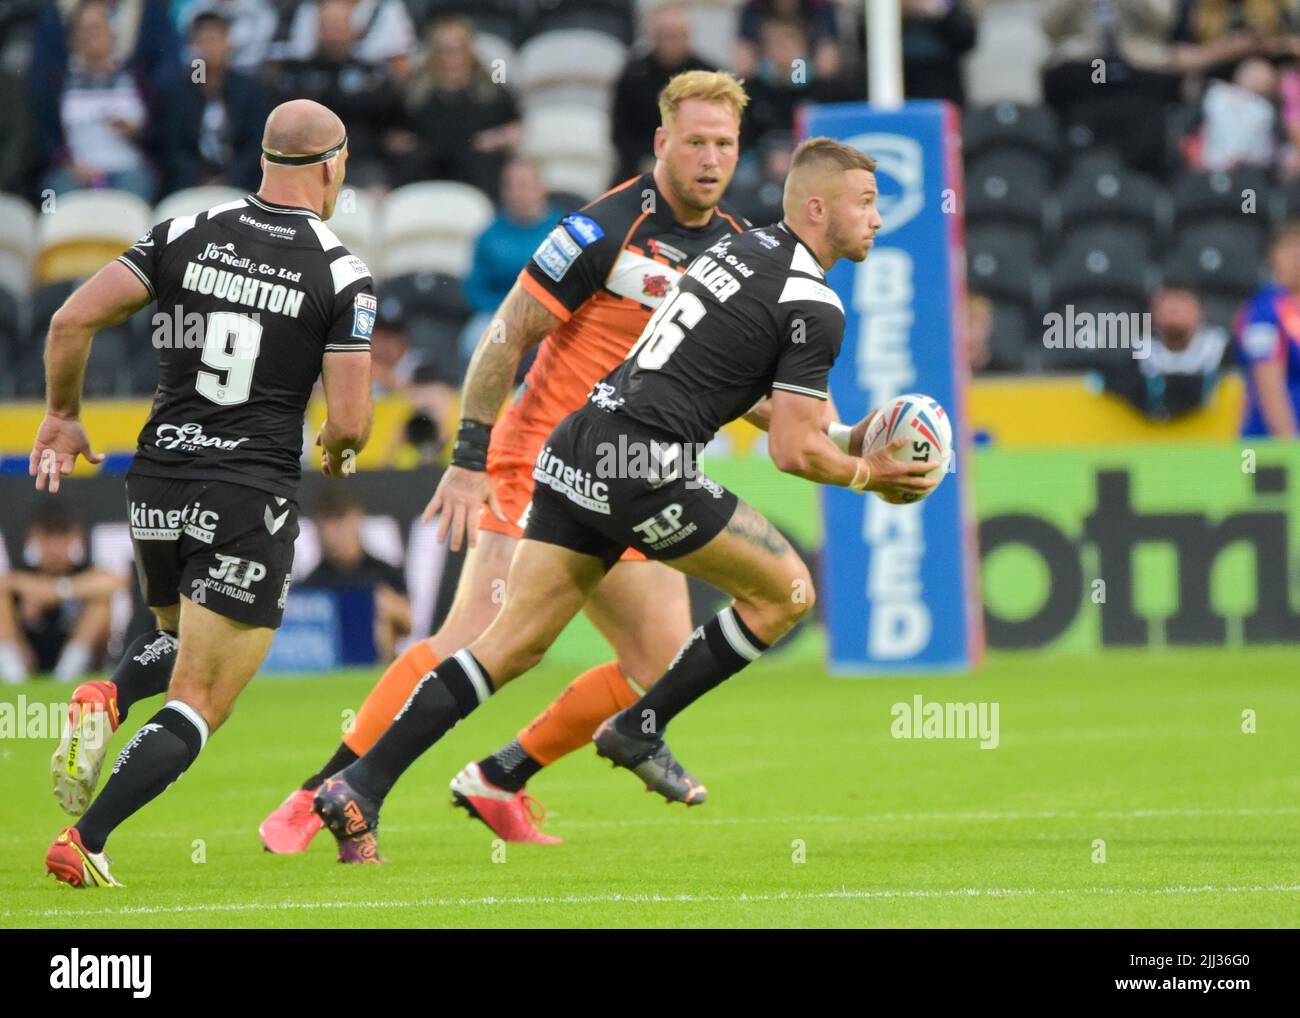 Hull, UK. 22nd July, 2022. Jack Walker of Hull FC runs the ball in on the first set Hull FC V Castleford Tigers Friday 22nd July 2022 MKM Stadium, Hull, UK Super League Credit: Craig Cresswell/Alamy Live News Credit: Craig Cresswell/Alamy Live News Stock Photo